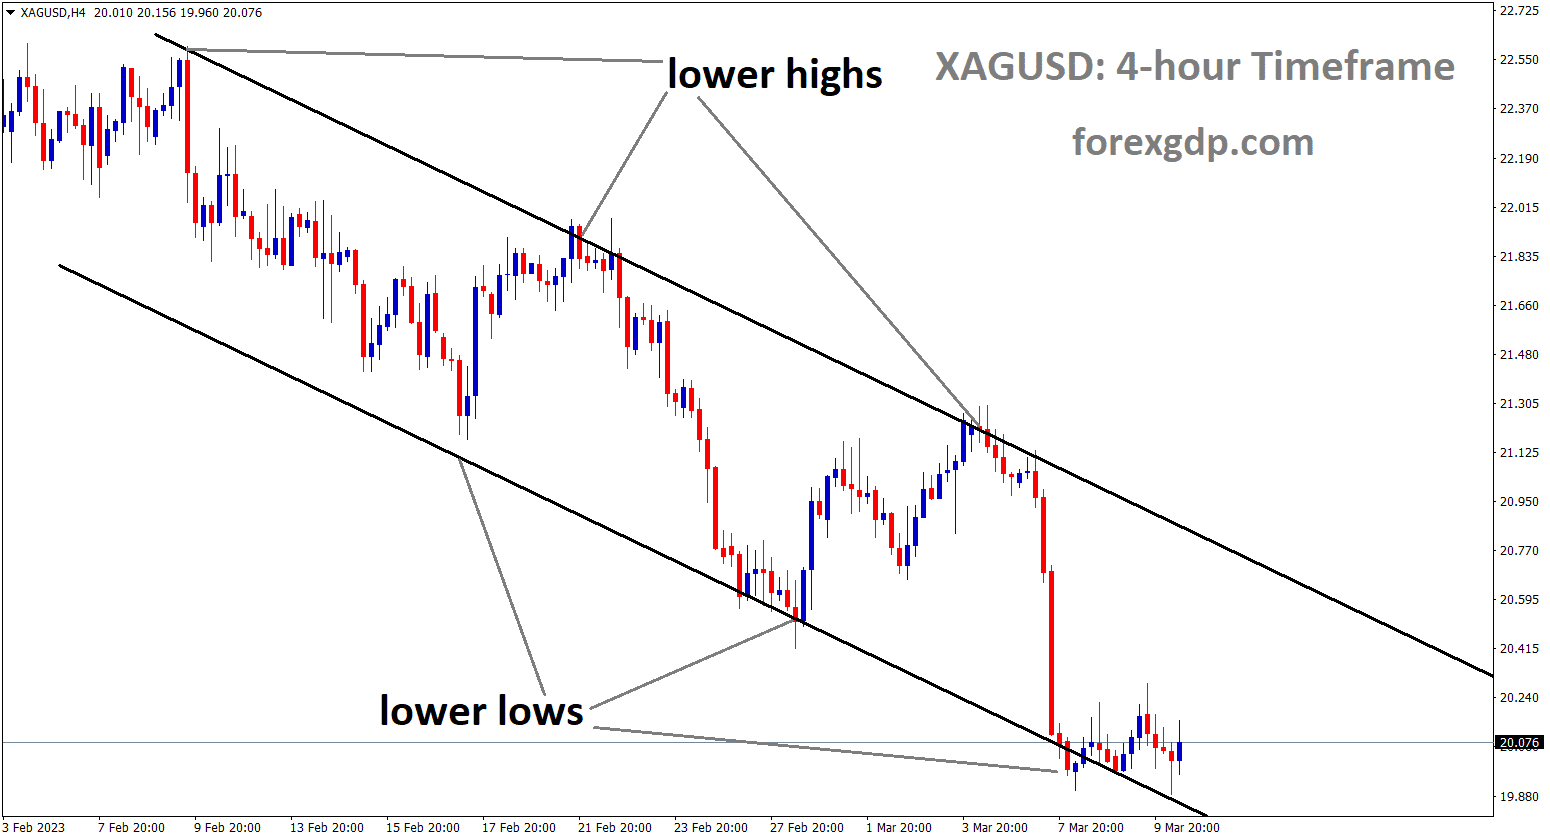 XAGUSD is moving in Descending channel and the market has reached the lower low area of the channel.